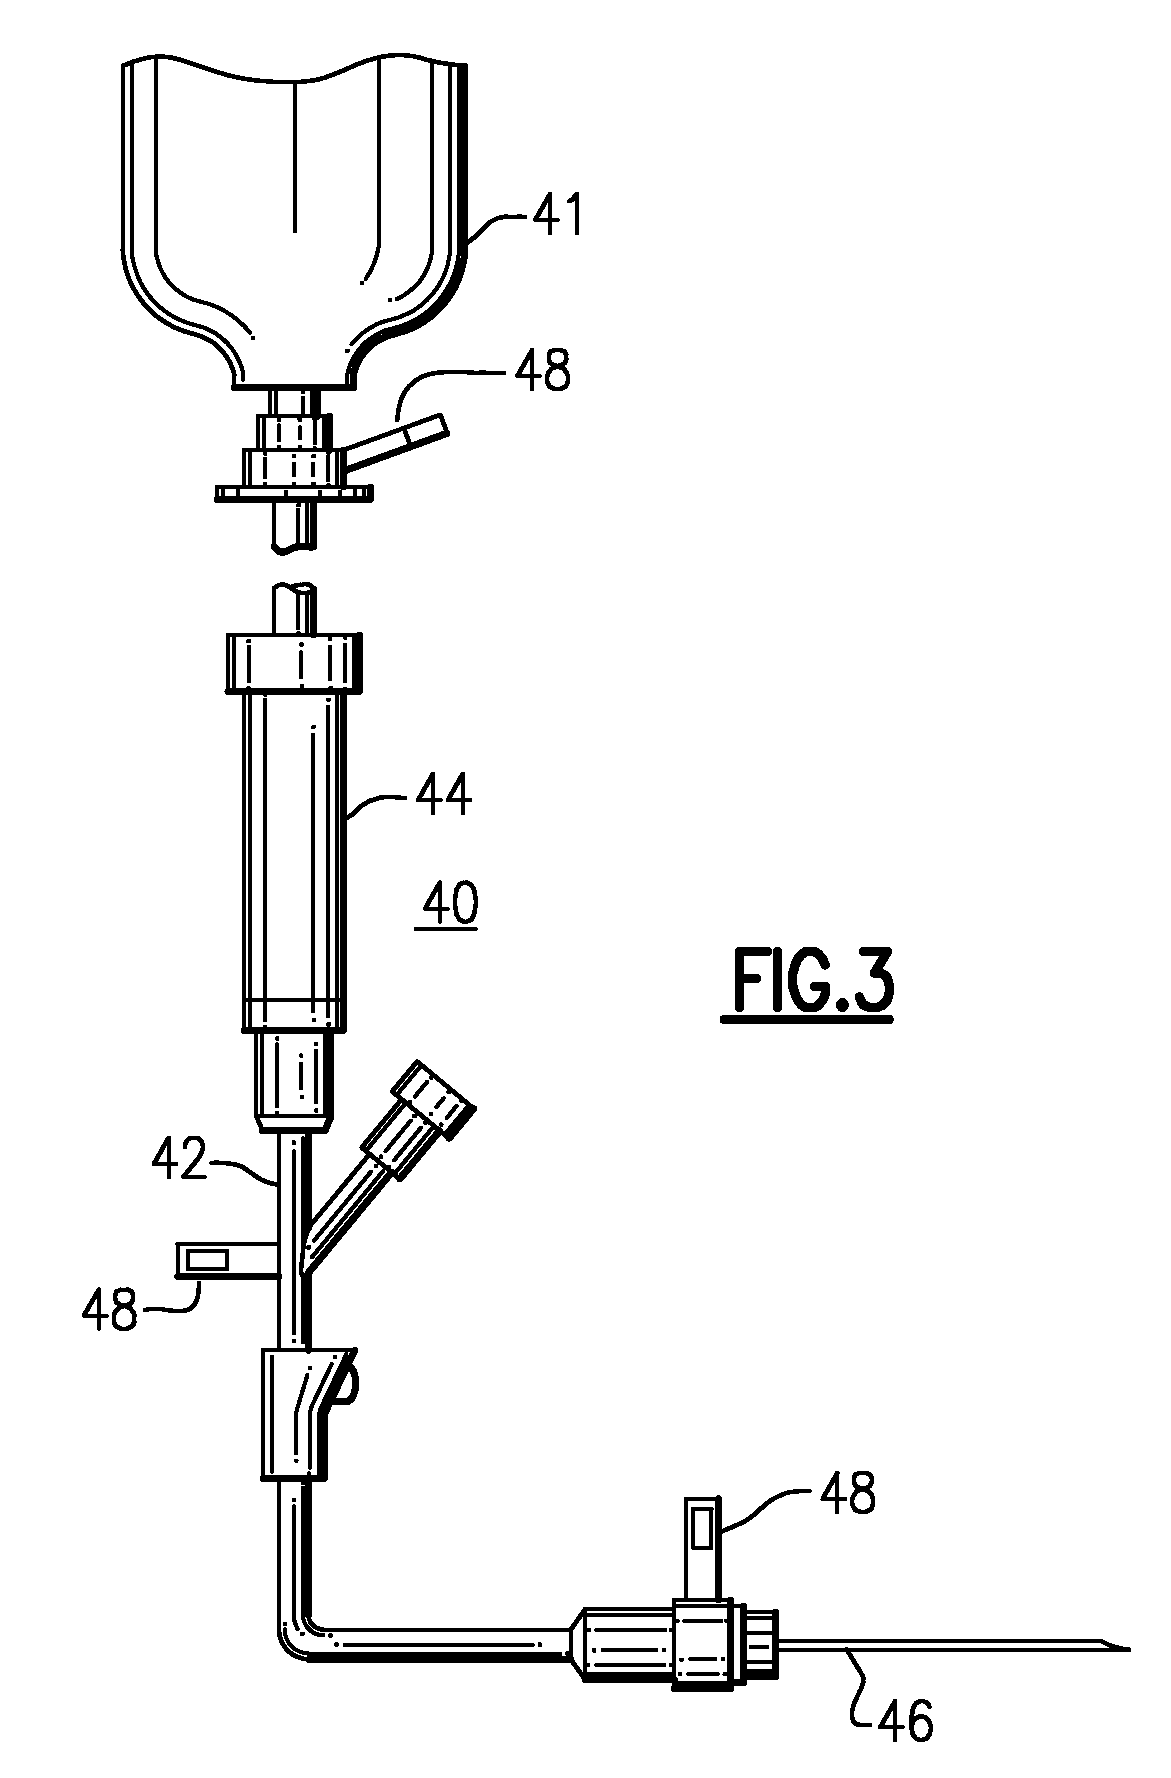 CUI-Tagged Catheter Devices and System